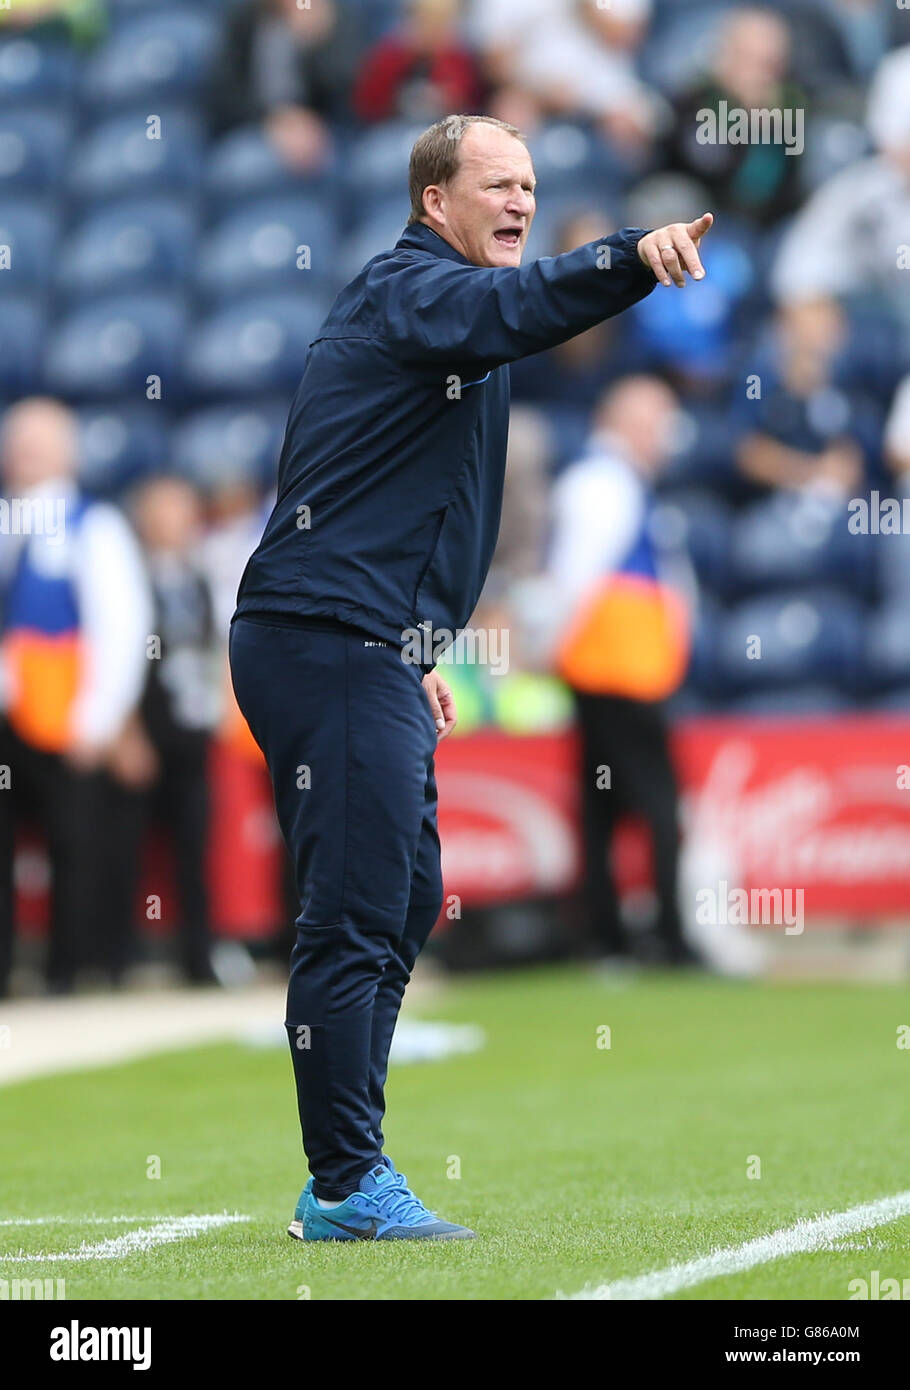 Soccer - Sky Bet Championship - Preston North End v Middlesbrough - Deepdale. Preston North End manager Simon Grayson gestures on the touchline Stock Photo